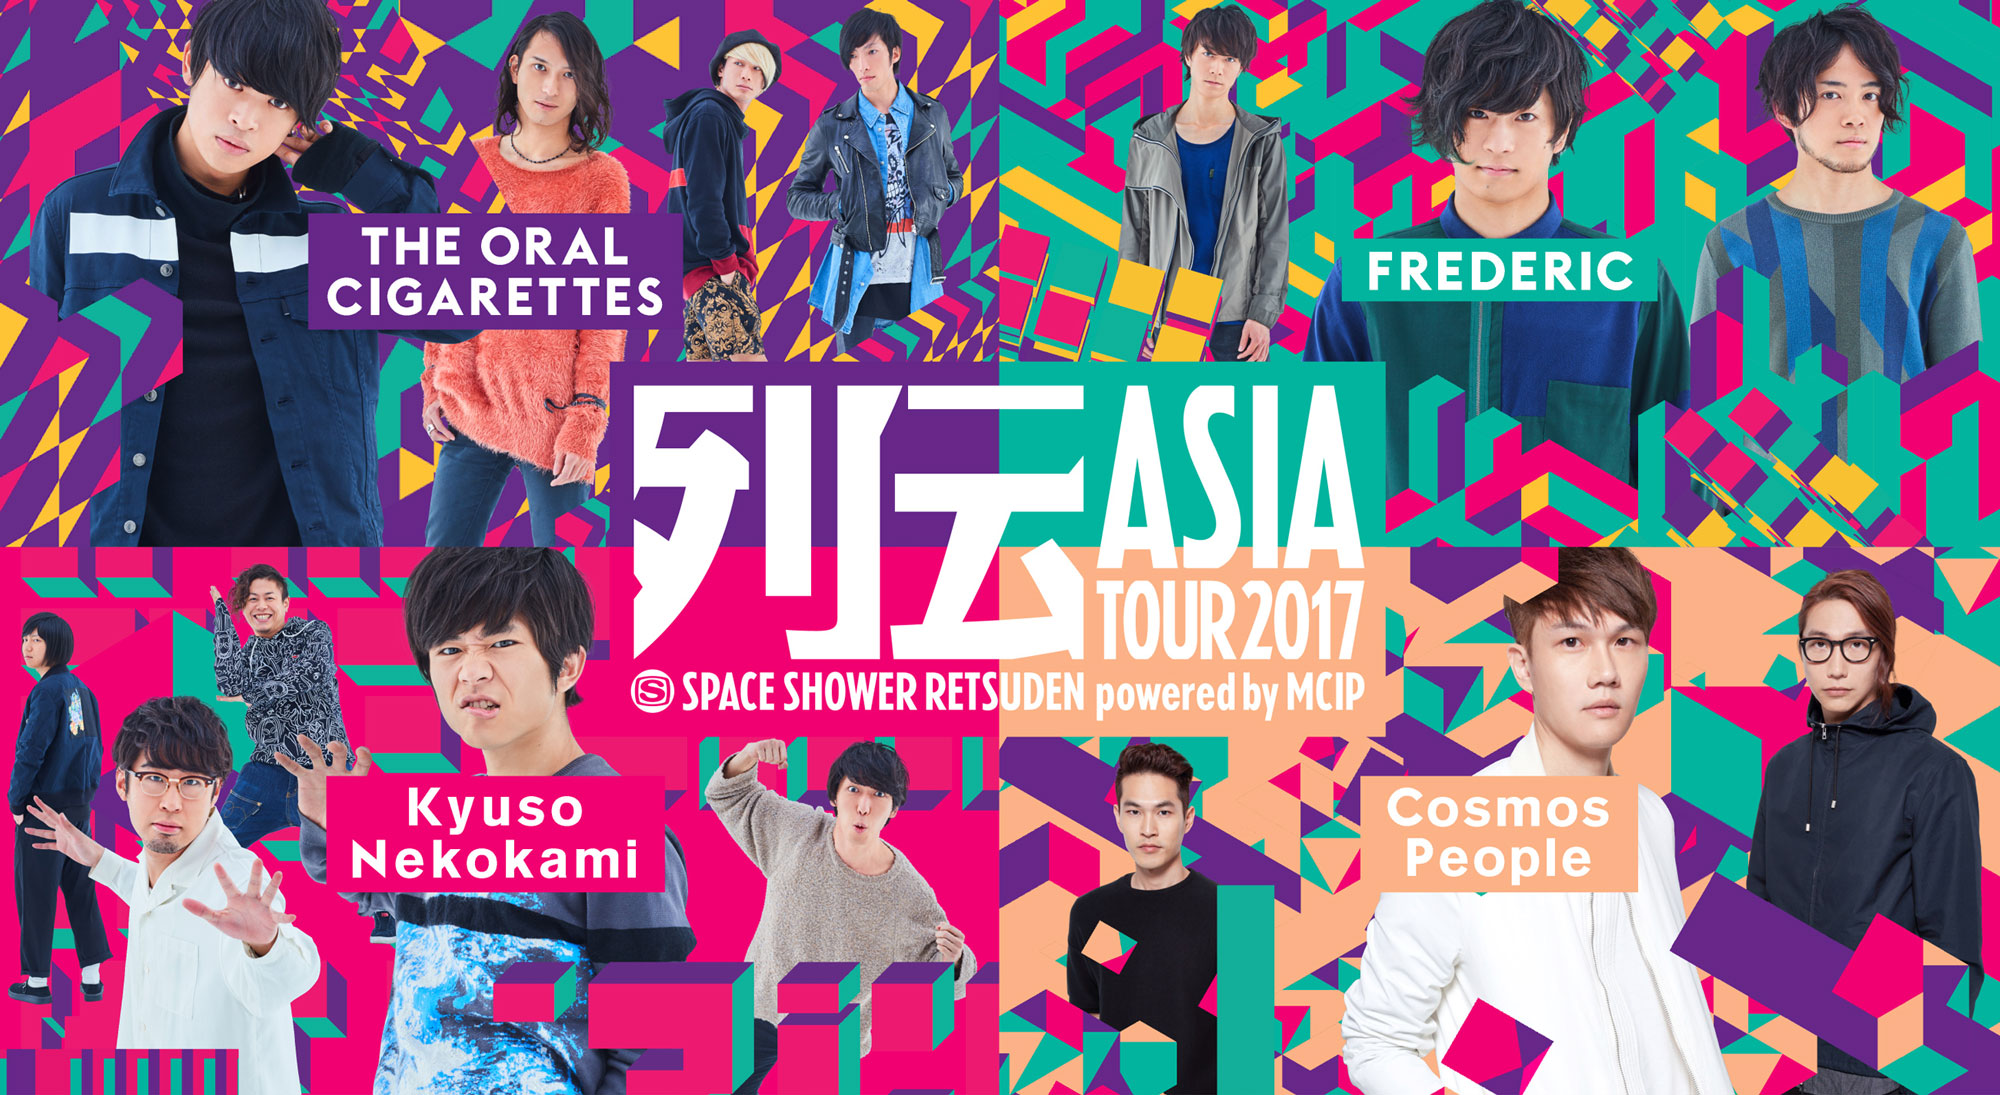 SPACE SHOWER 列傳 ASIA TOUR 2017 powered by MCIP